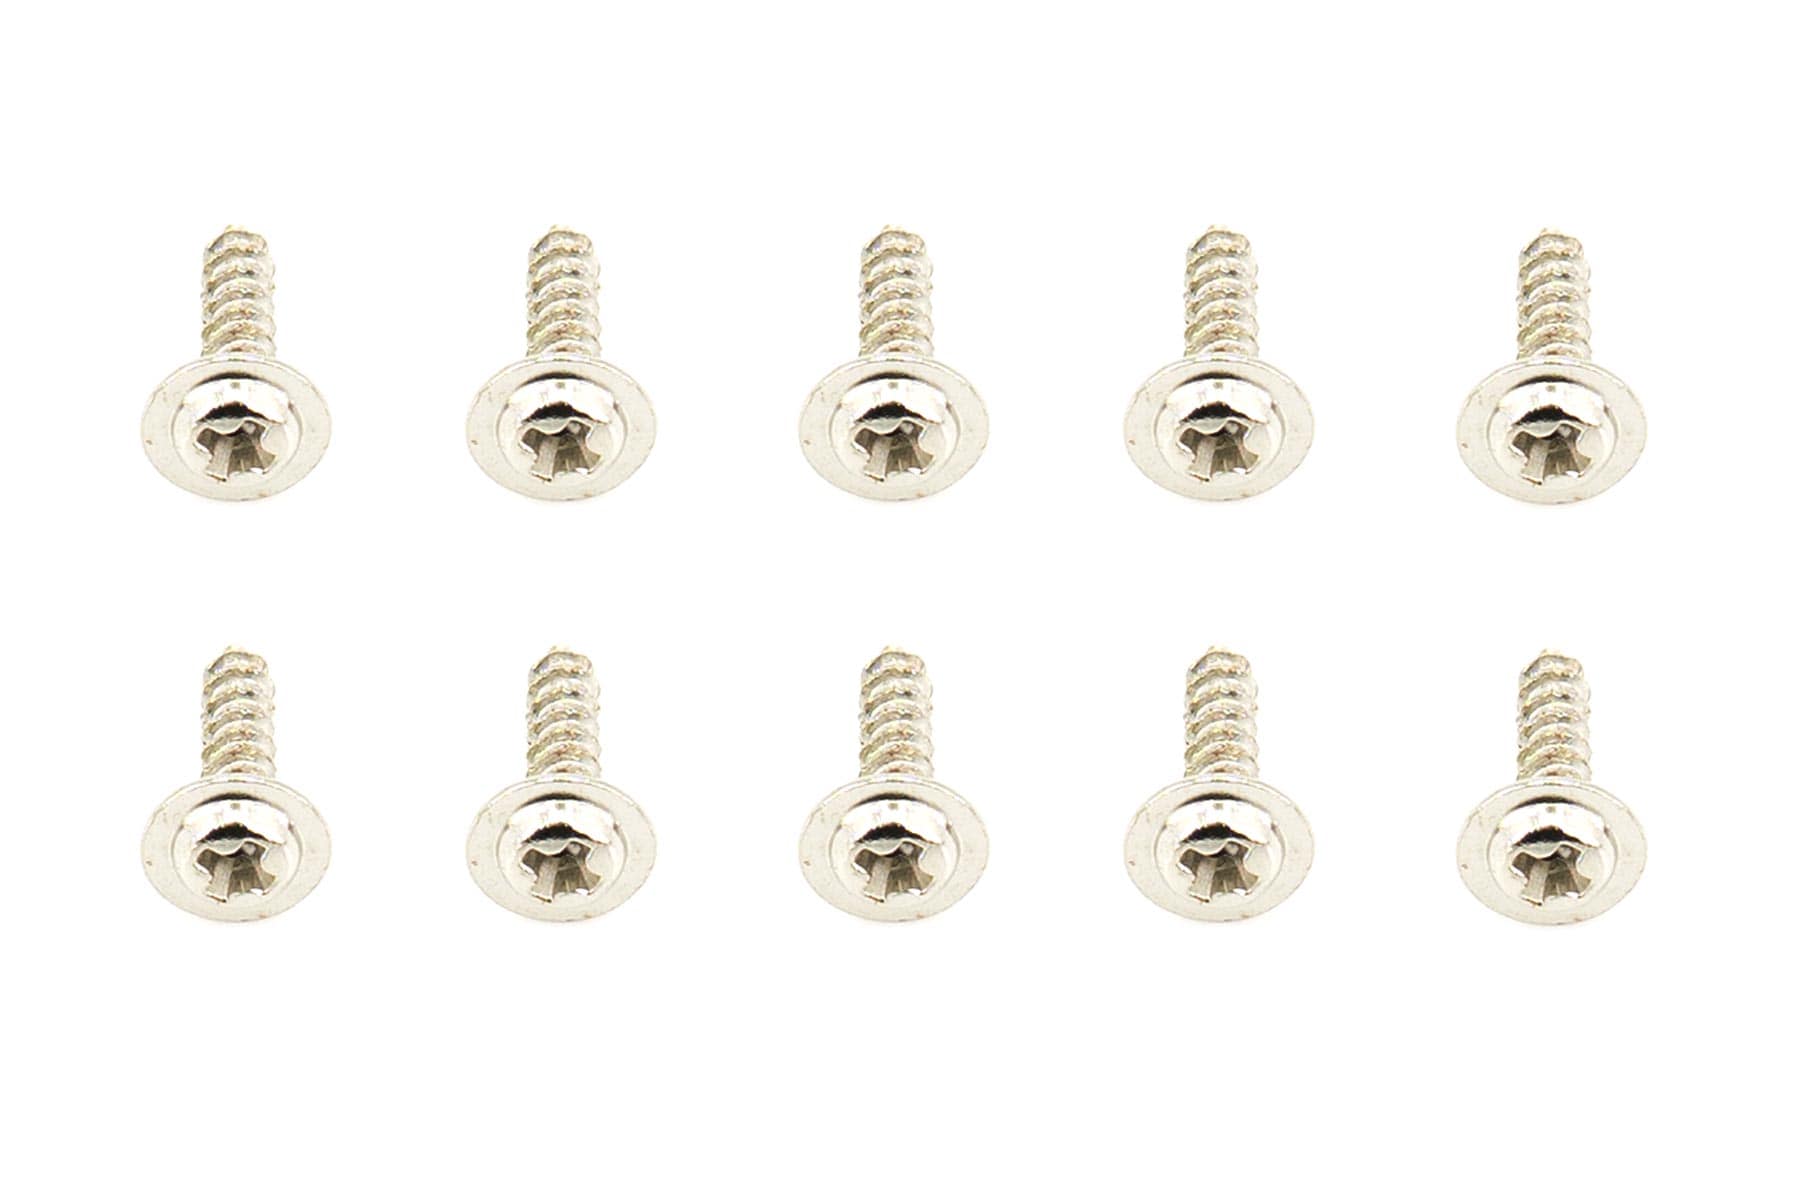 BenchCraft 2mm x 8mm Self-Tapping Washer Head Screws (10 Pack)